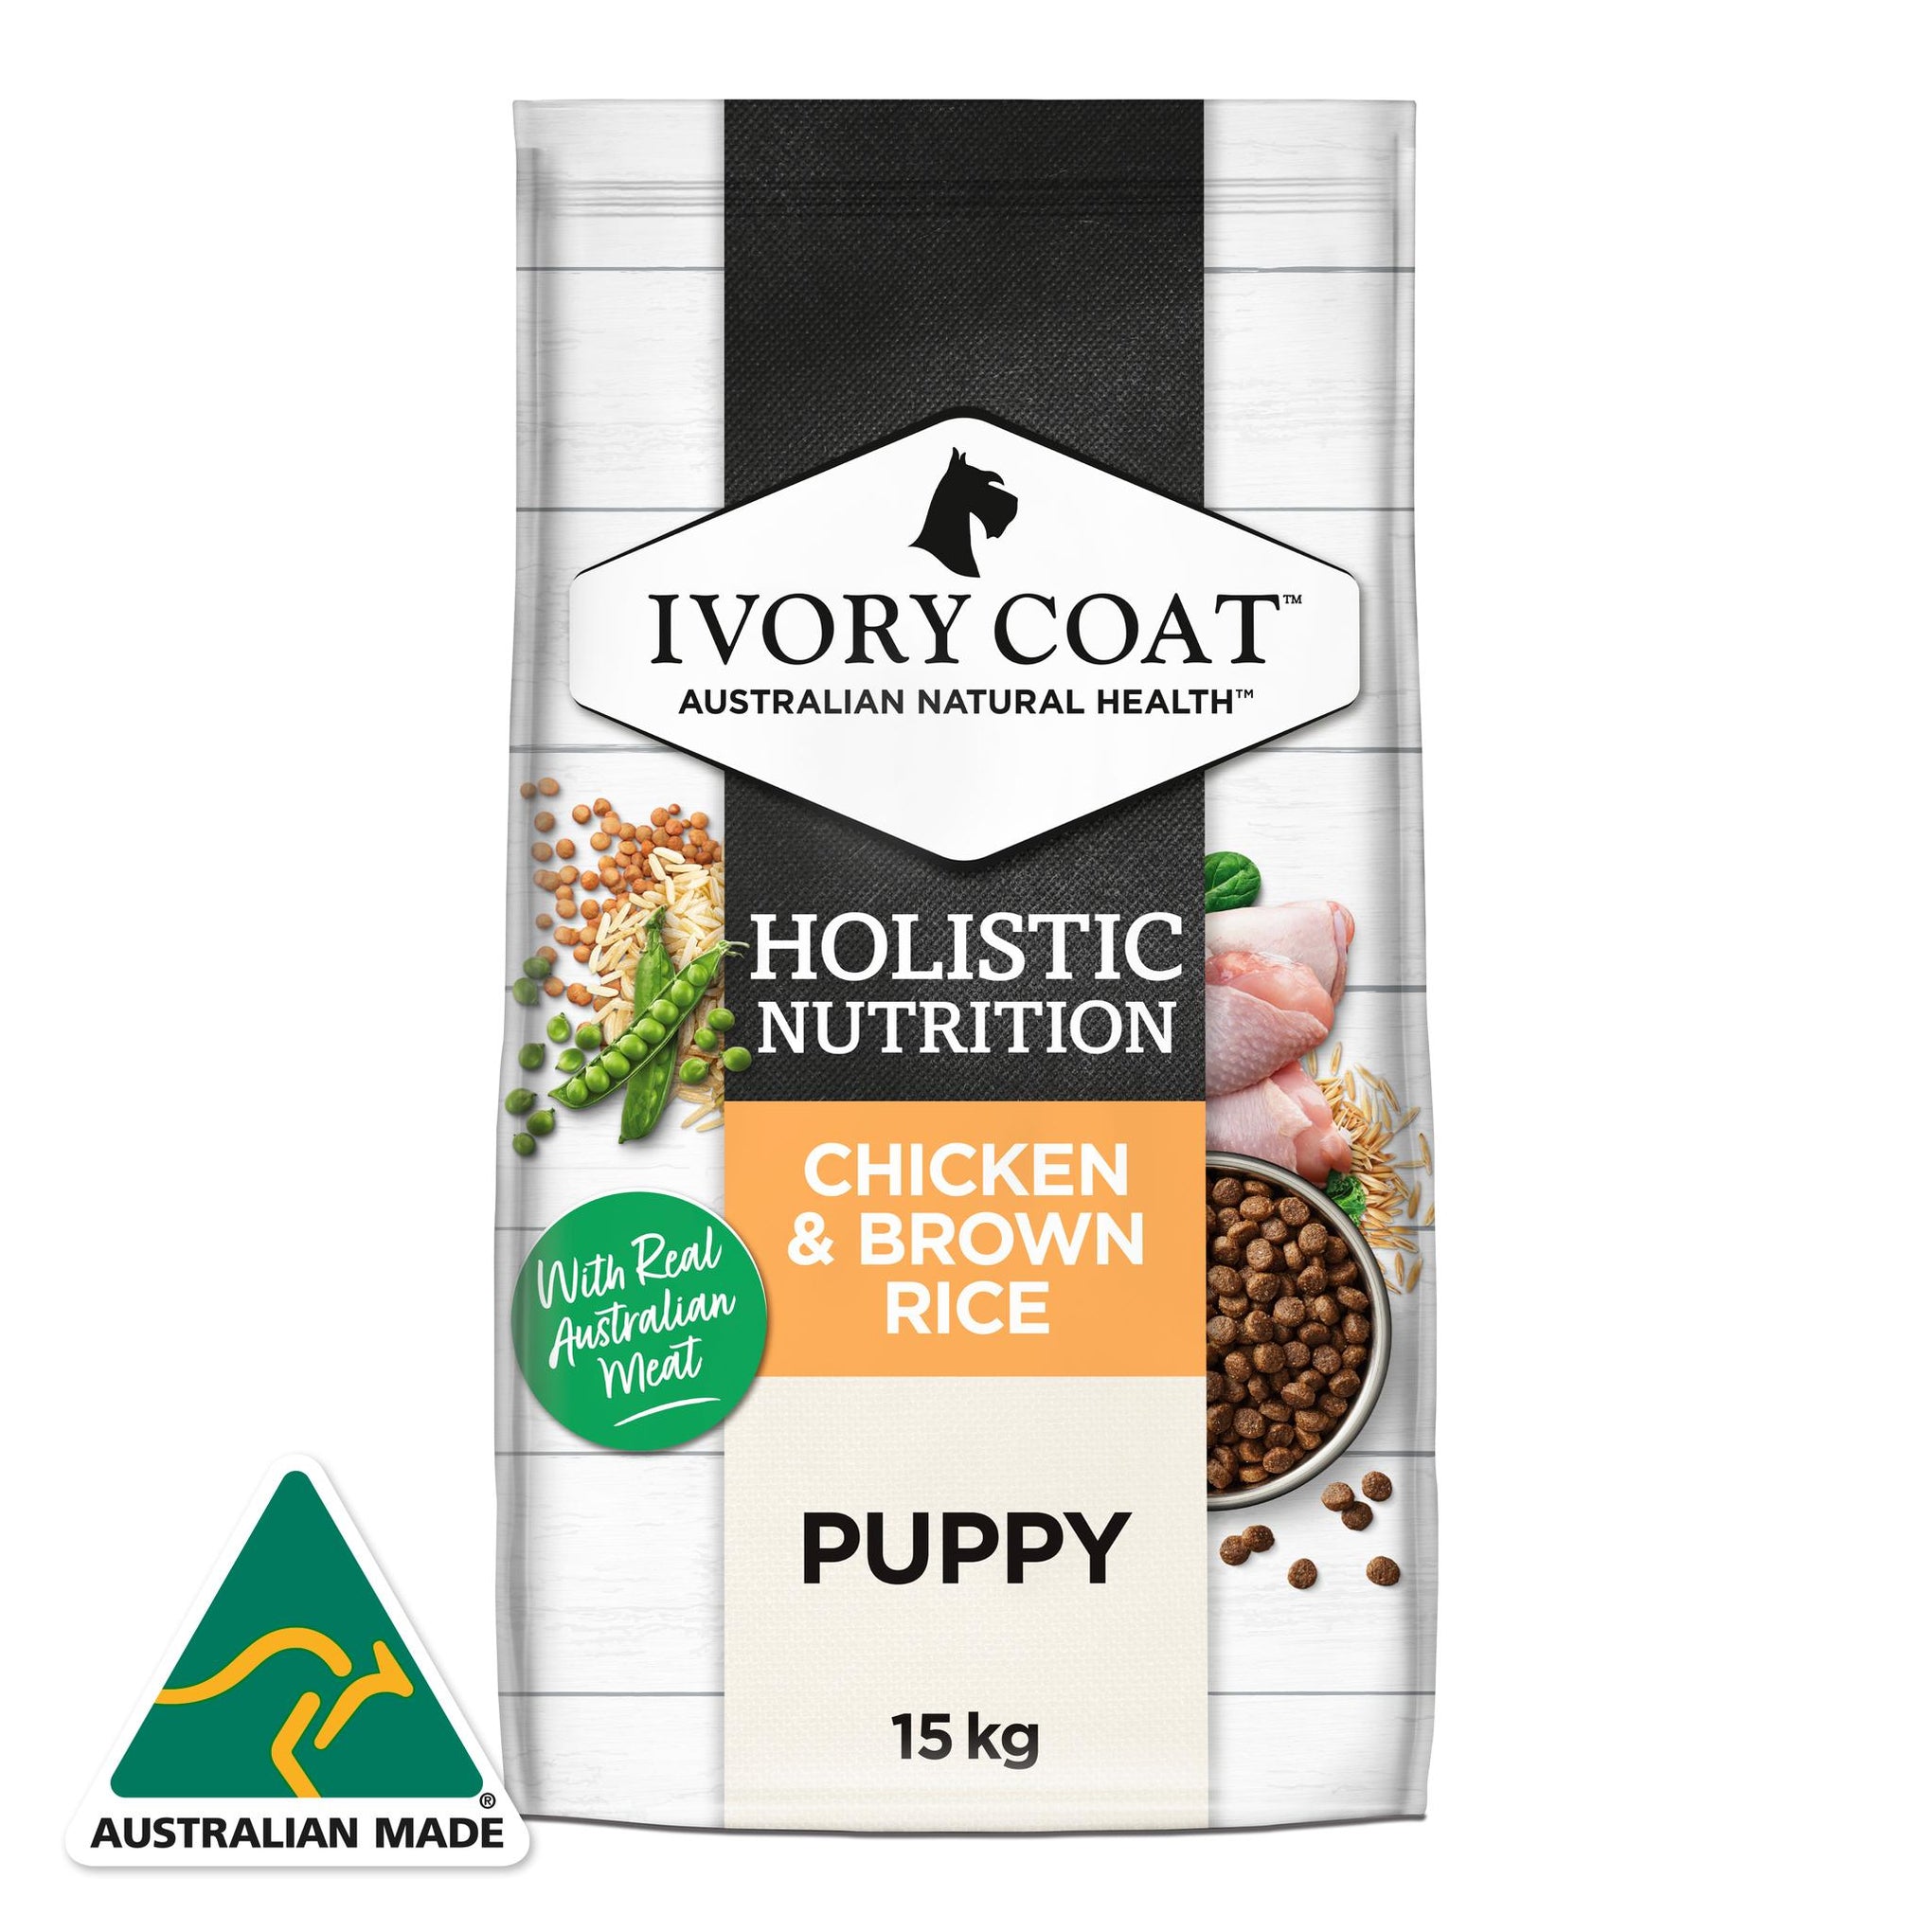 Ivory Coat Holistic Nutrition Puppy Chicken & Brown Rice Dry Dog Food